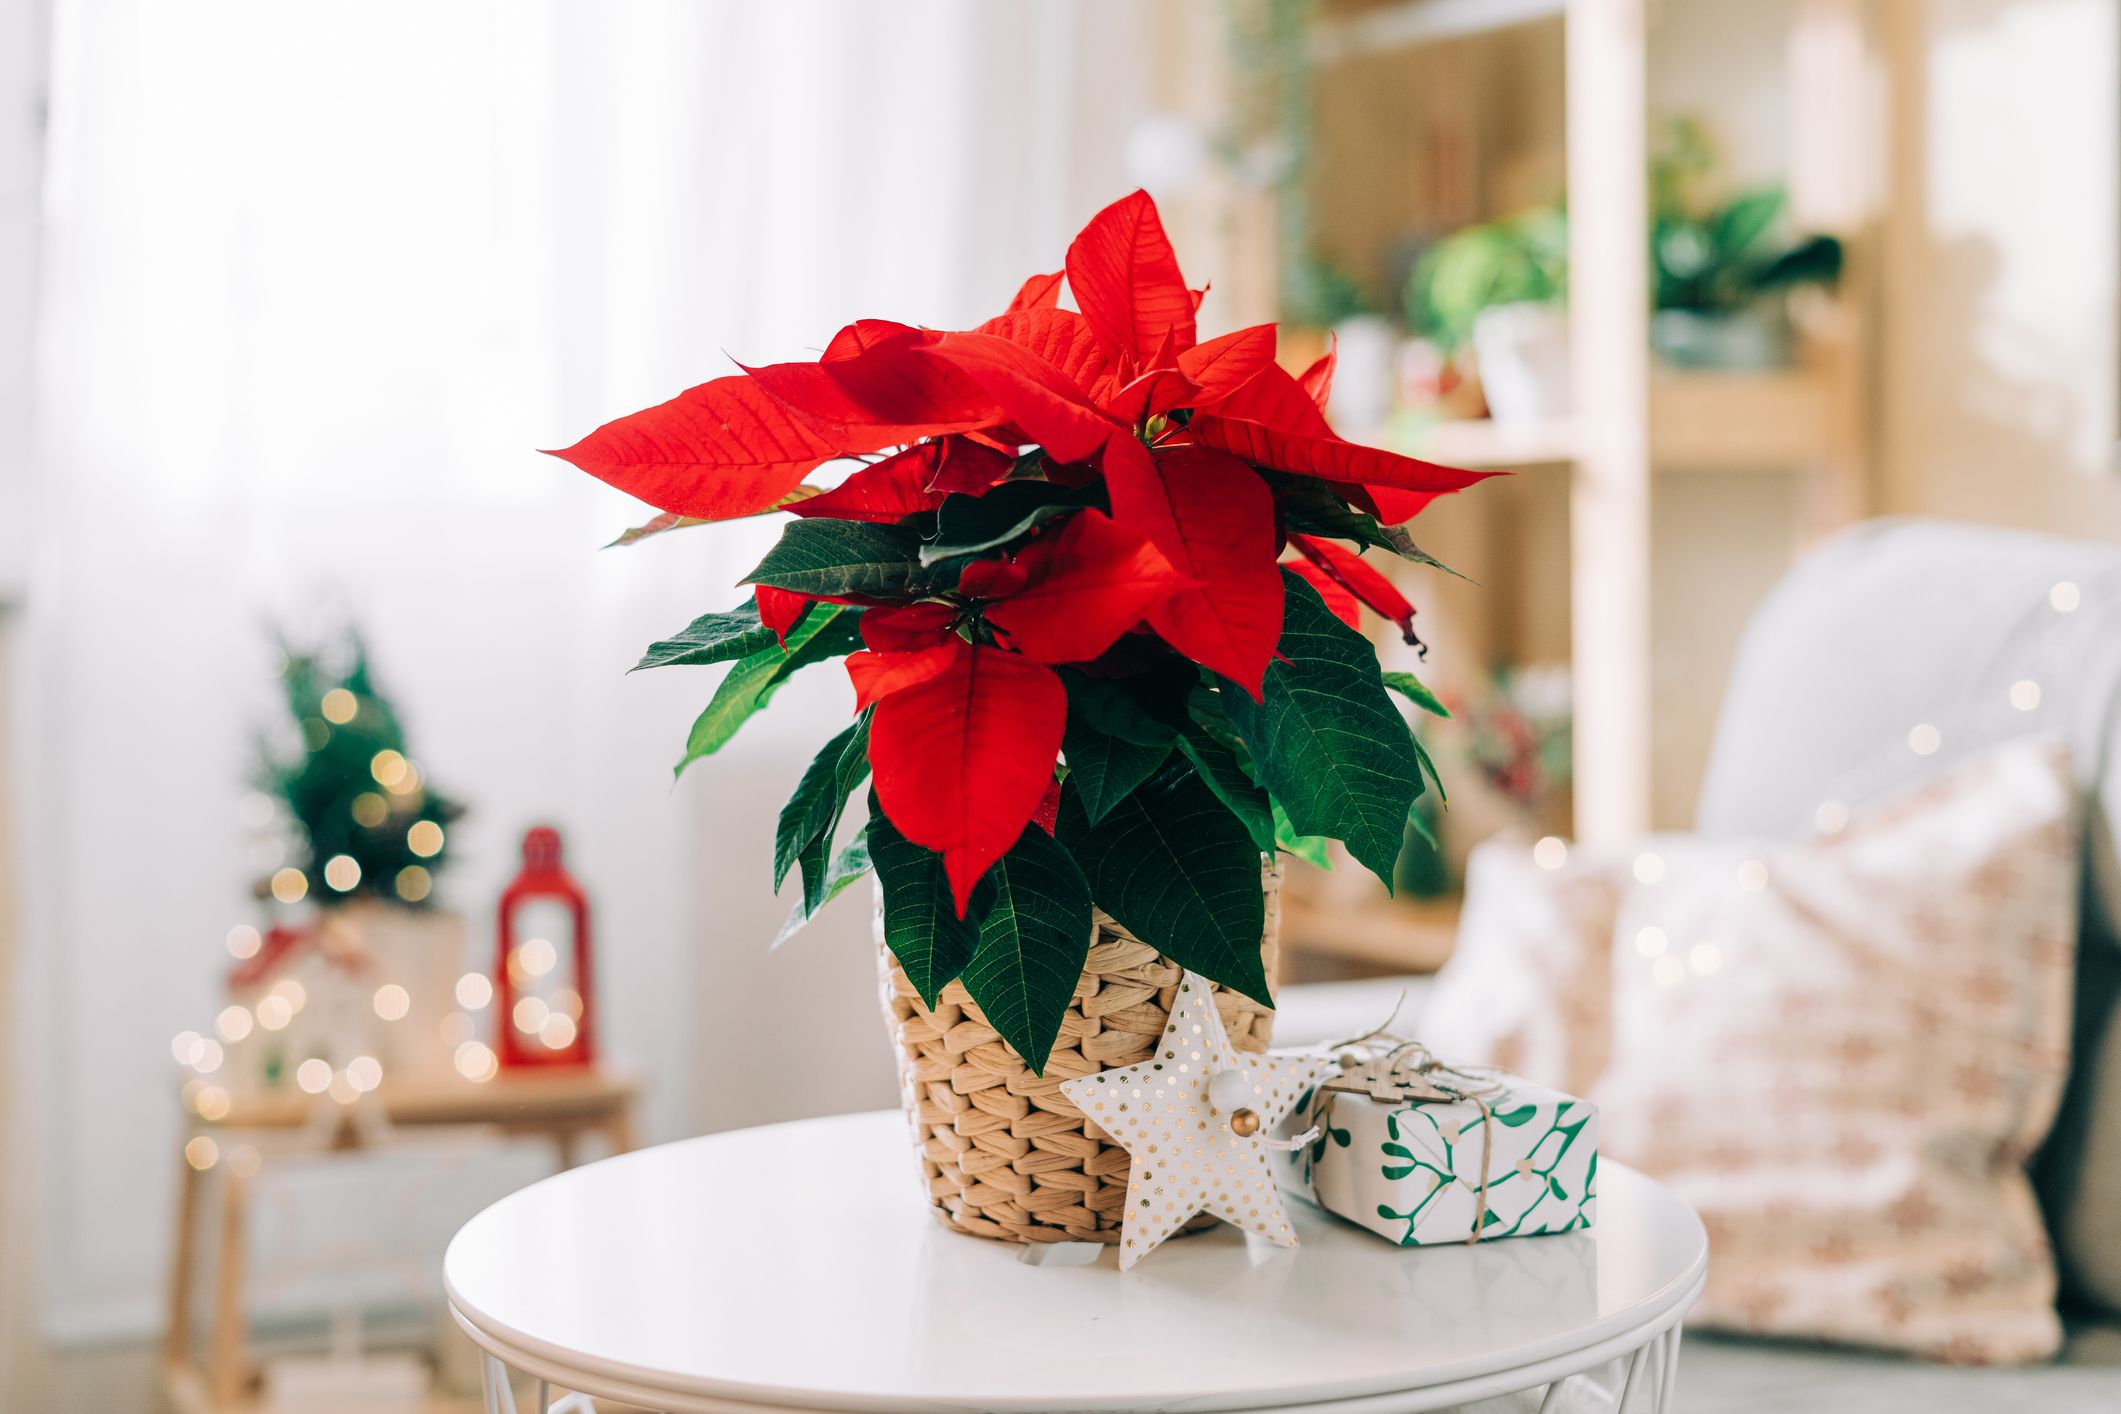 https://hips.hearstapps.com/hmg-prod/images/beautiful-poinsettia-in-wicker-pot-gifts-and-space-royalty-free-image-1697053005.jpg